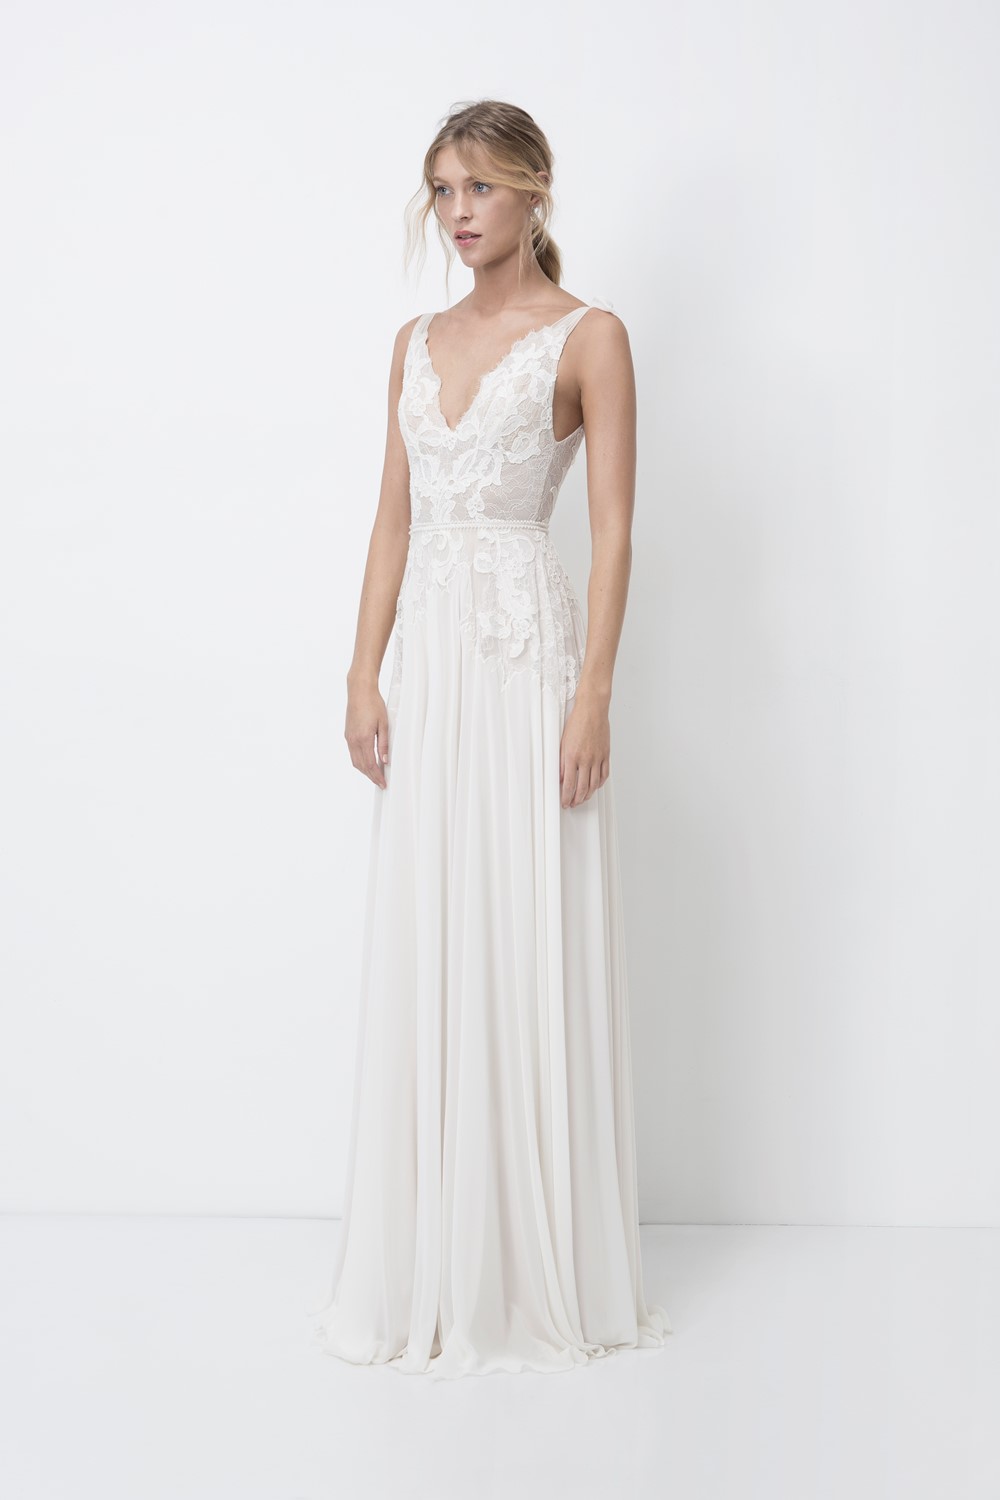 Camilla Wedding Dress from Lihi Hod's 2018 Bridal Collection